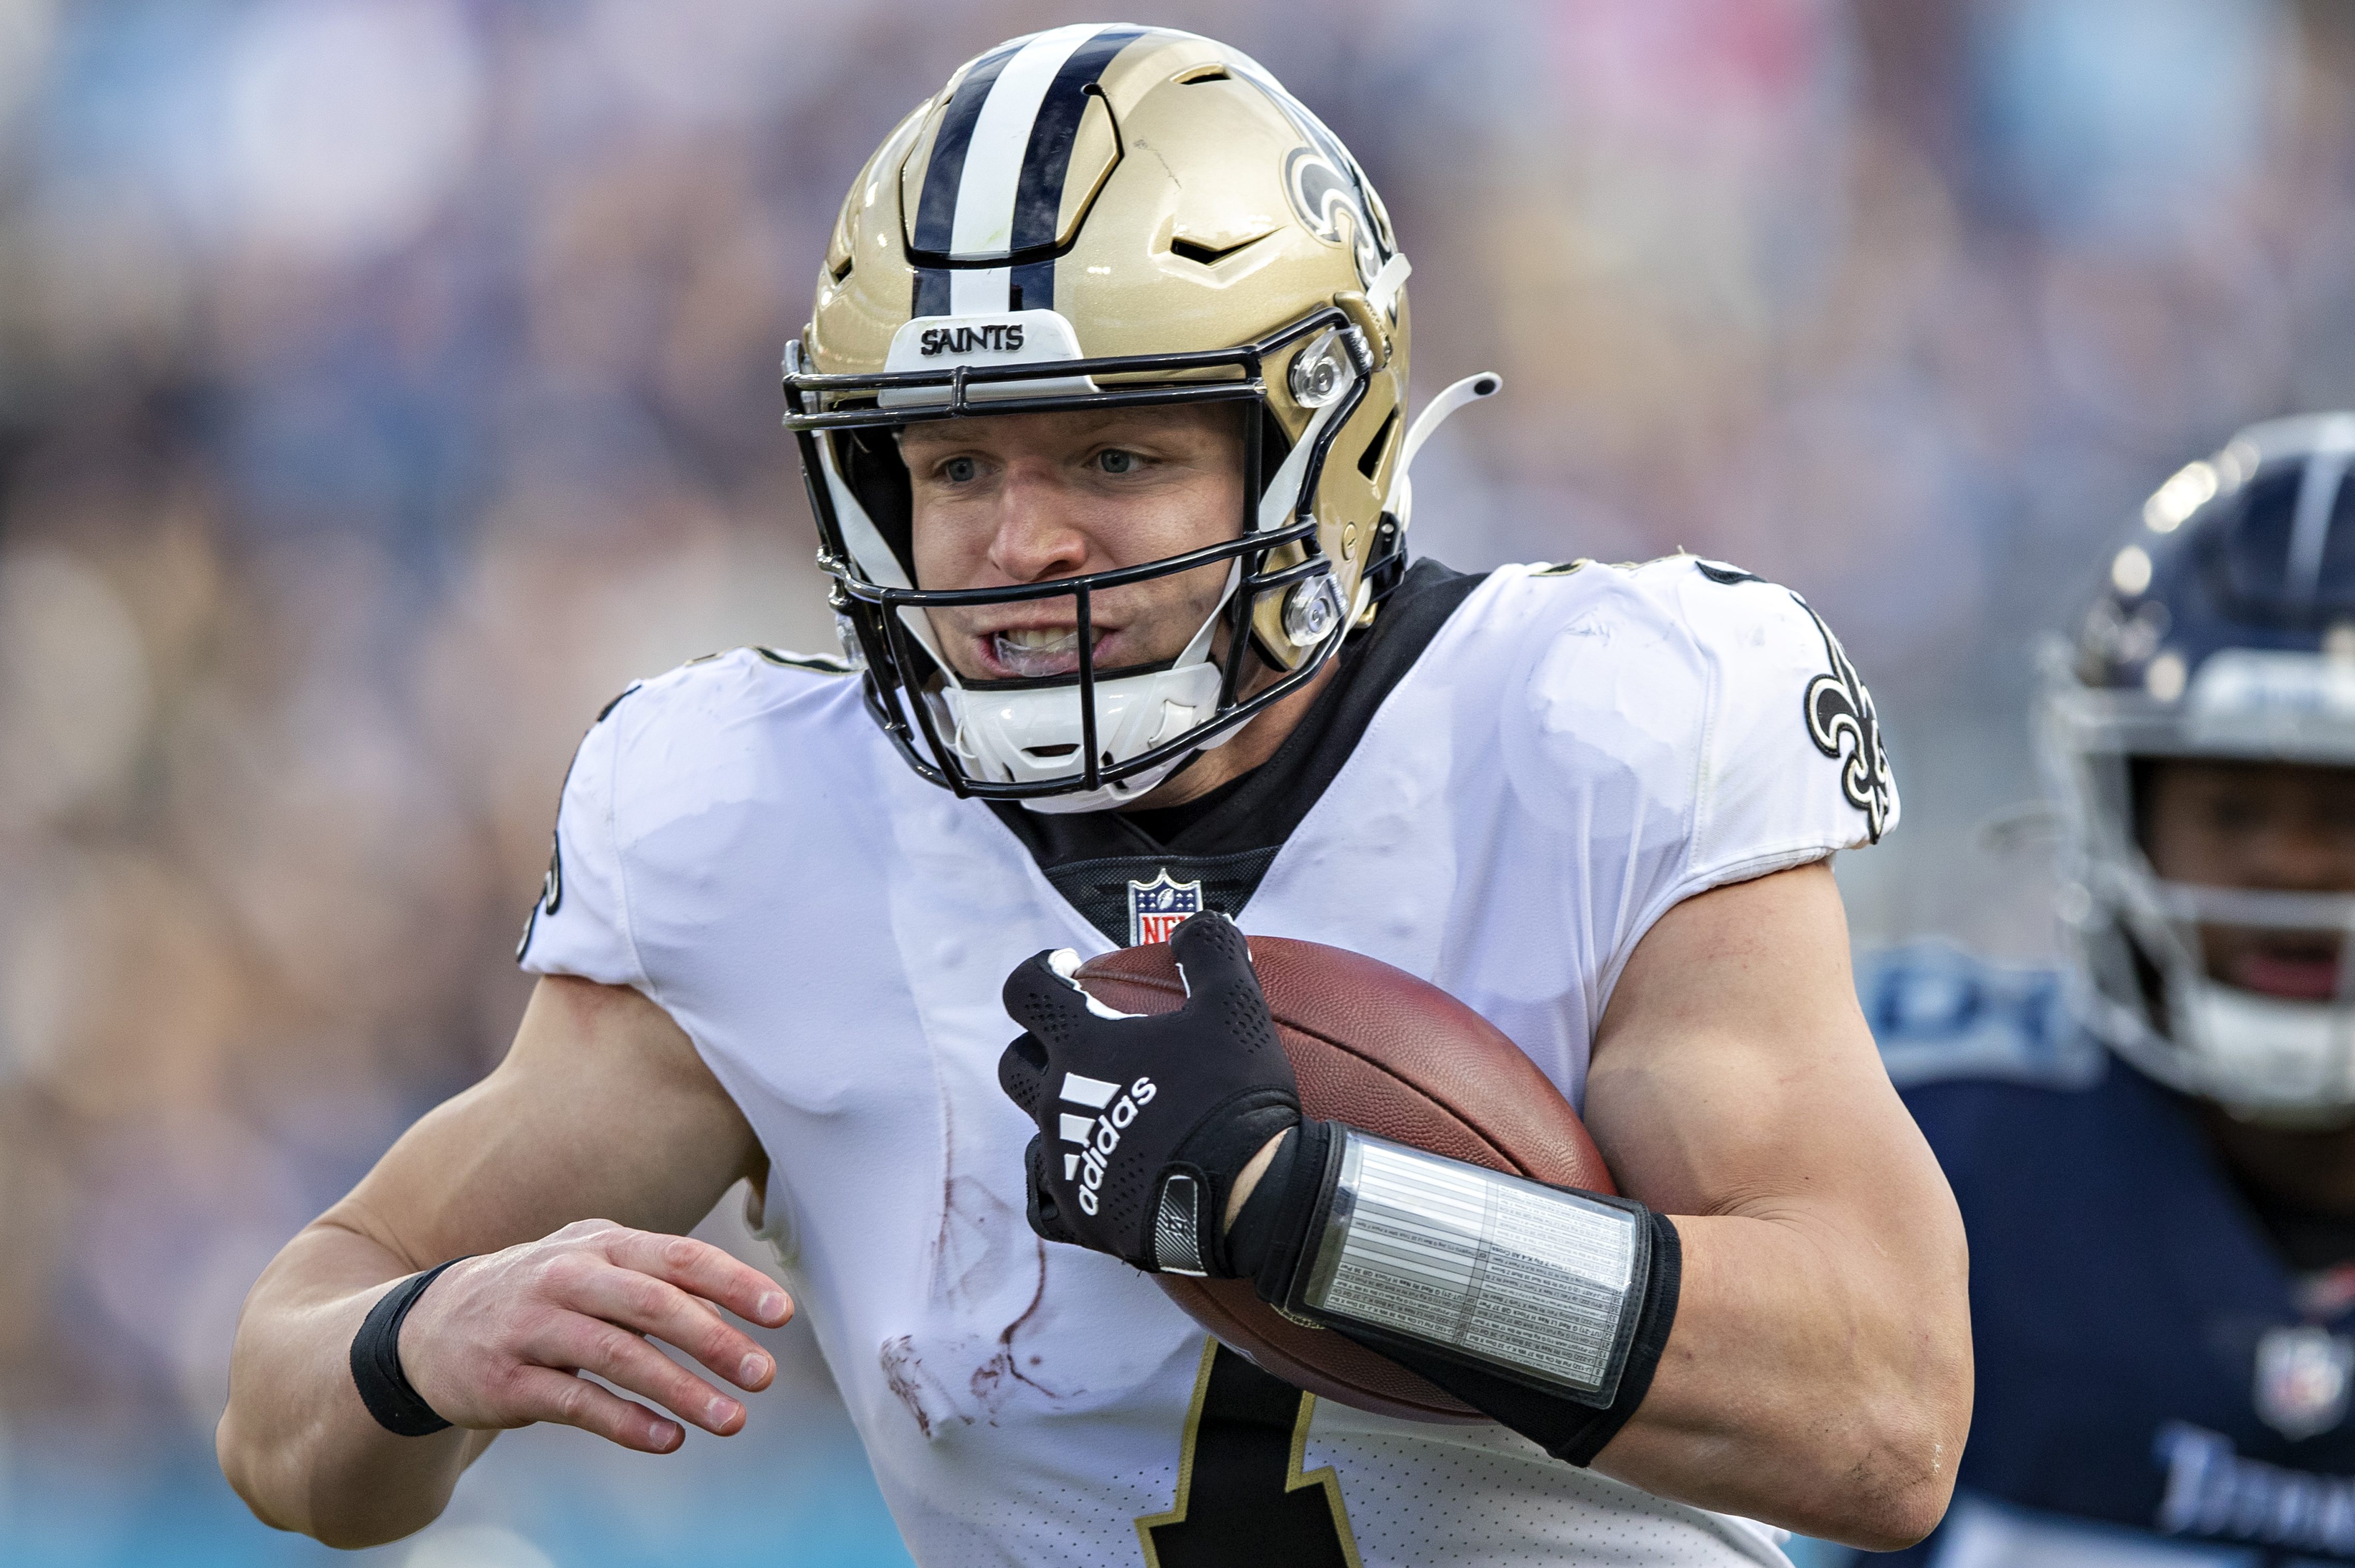 Taysom Hill Gifts & Merchandise for Sale